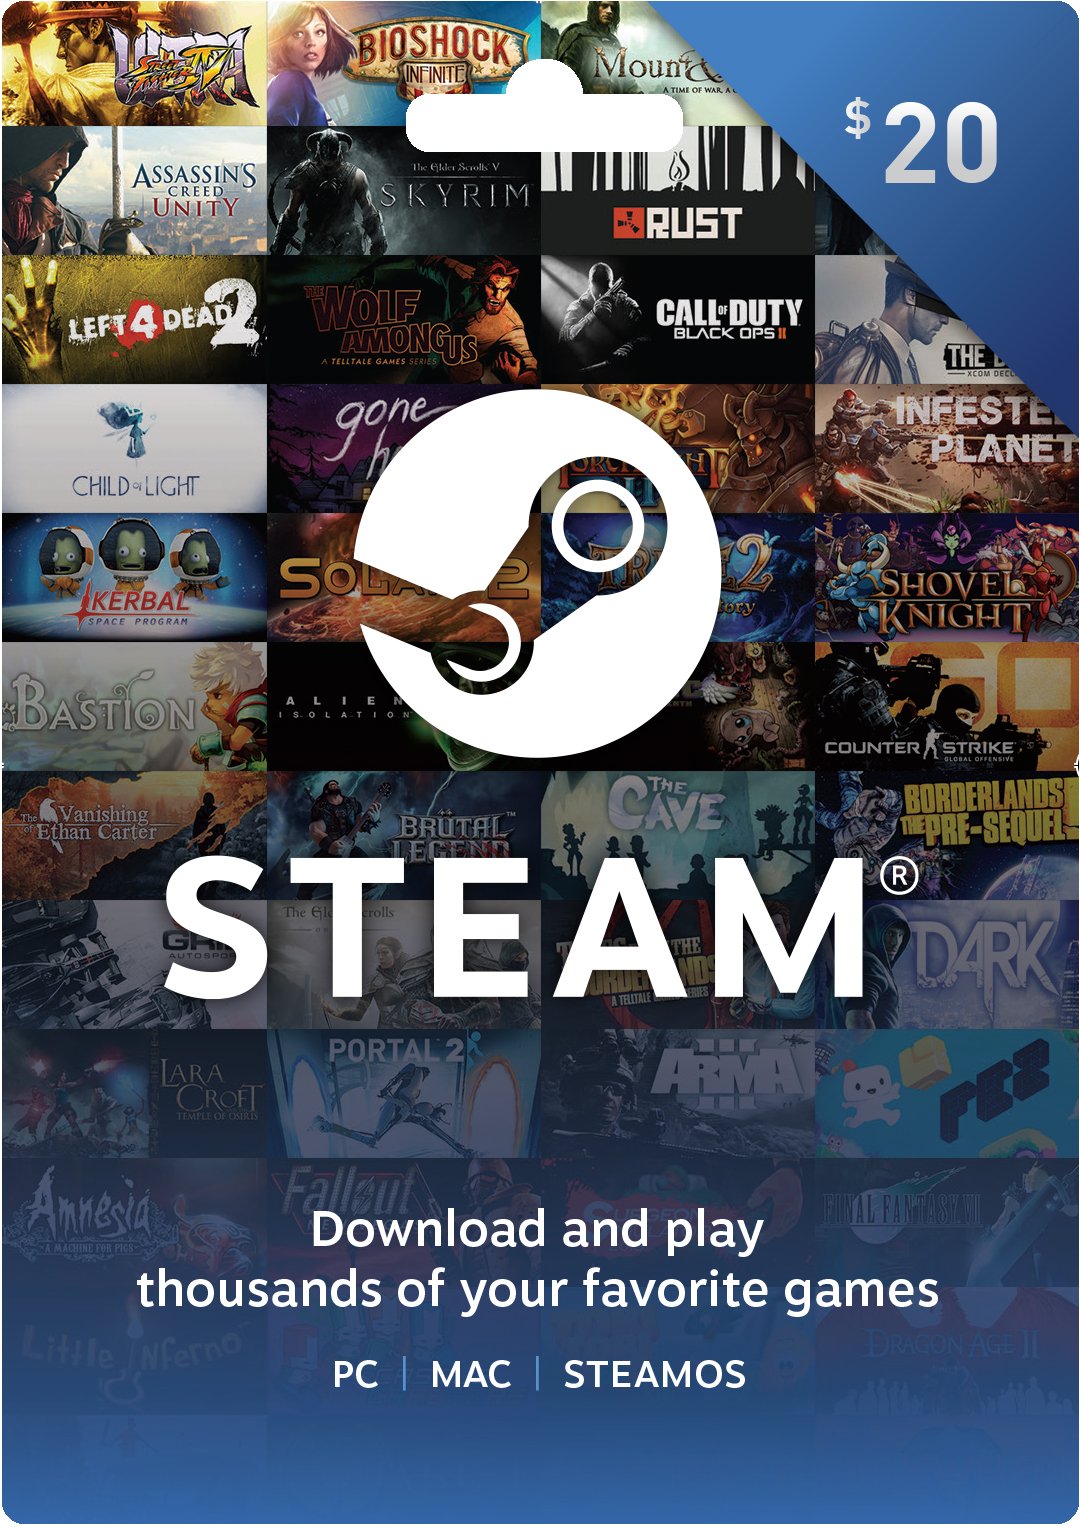 Buy Steam Gift Card Online | How To Buy Steam Gift Card | Baxity Store